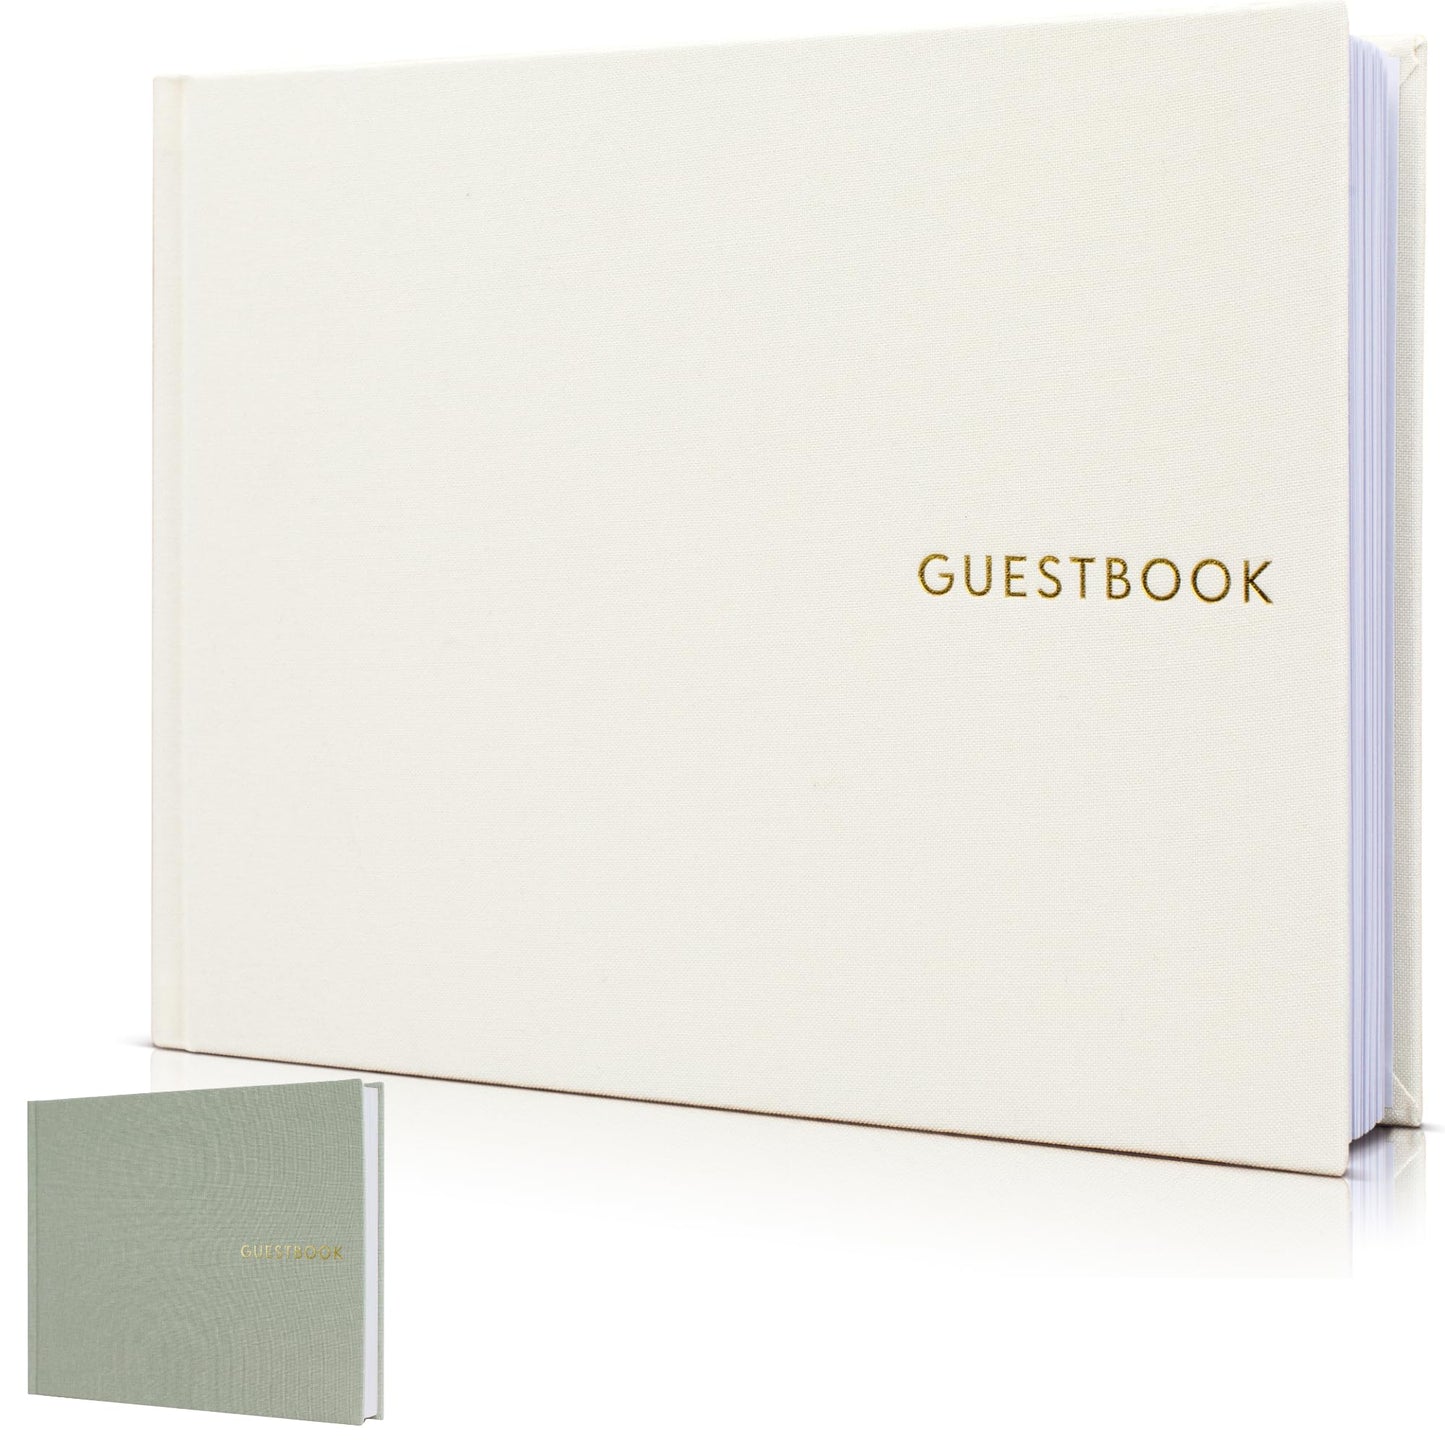 Beautiful Wedding Guest Book for Your Wedding Reception - Simply Elegant Guestbook to Sign in and Add Polaroid Photos - The Perfect Wedding Or Baby Shower Guest Book and Addition to Your Big Day